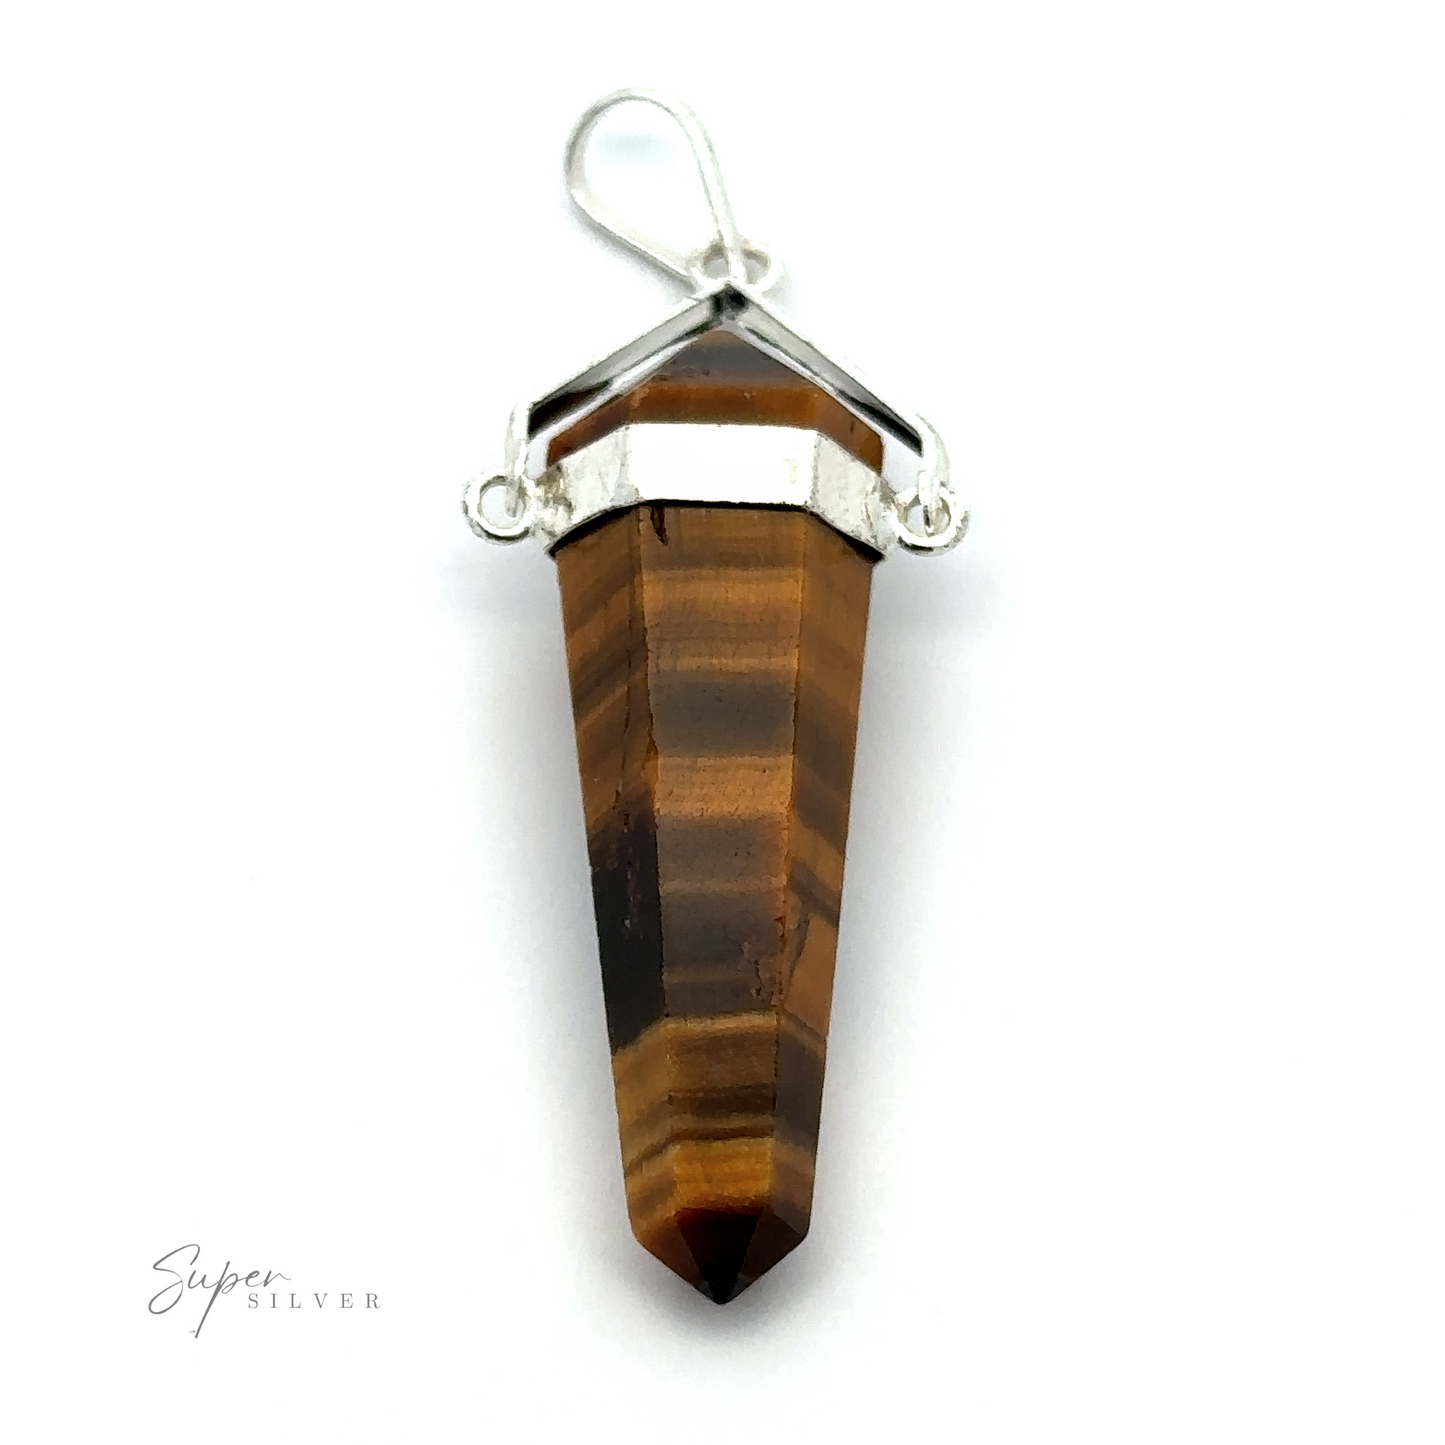 
                  
                    A Raw Stone Swivel Pendant with silver-plated detailing and a triangular, pointed shape, displayed against a plain white background.
                  
                